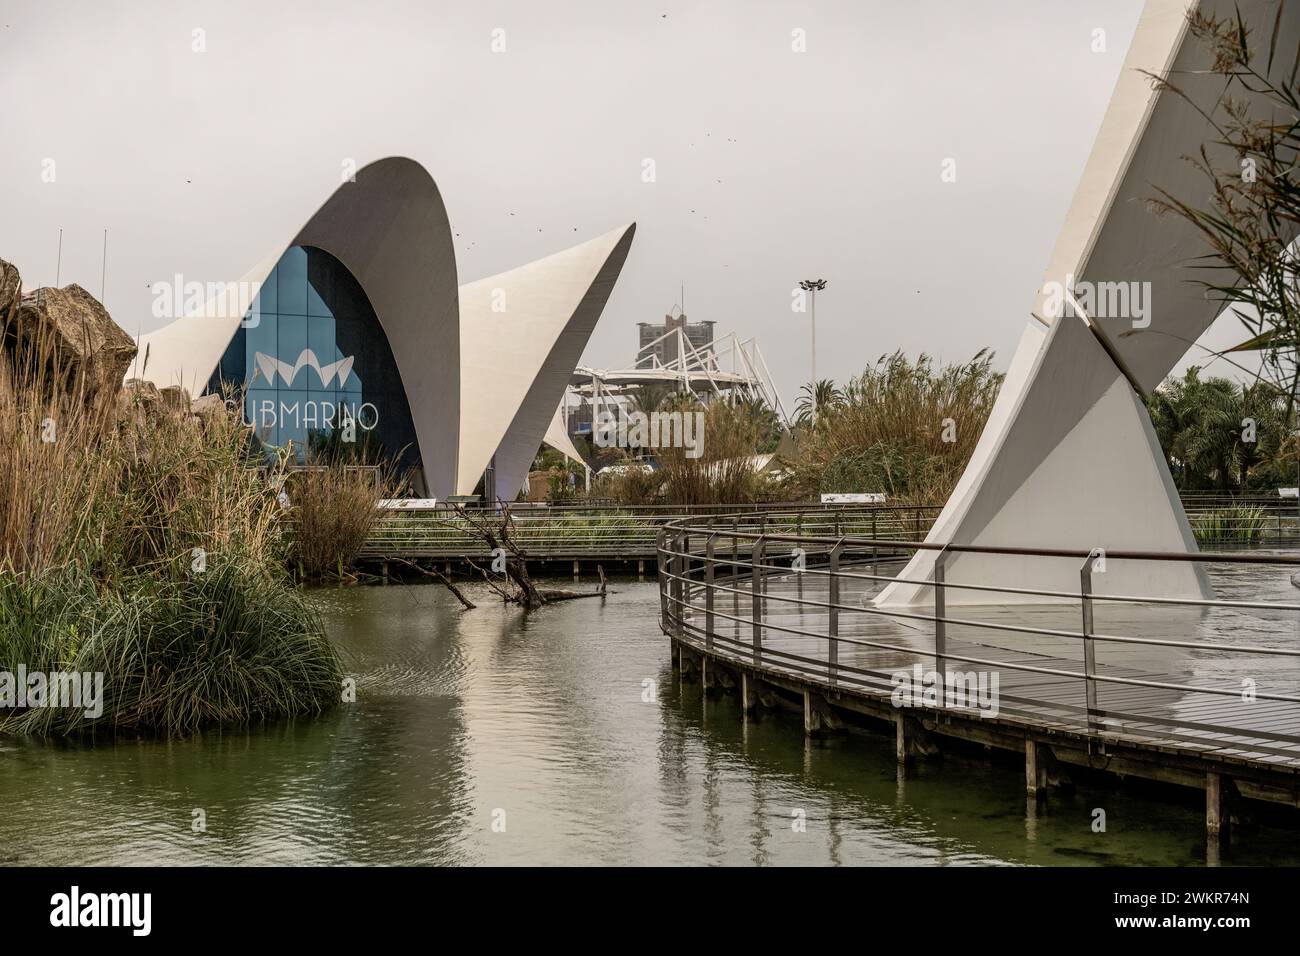 The striking modern architecture of the Oceanografic, the largest aquarium in Europe, on a rainy day in Valencia, Spain Stock Photo